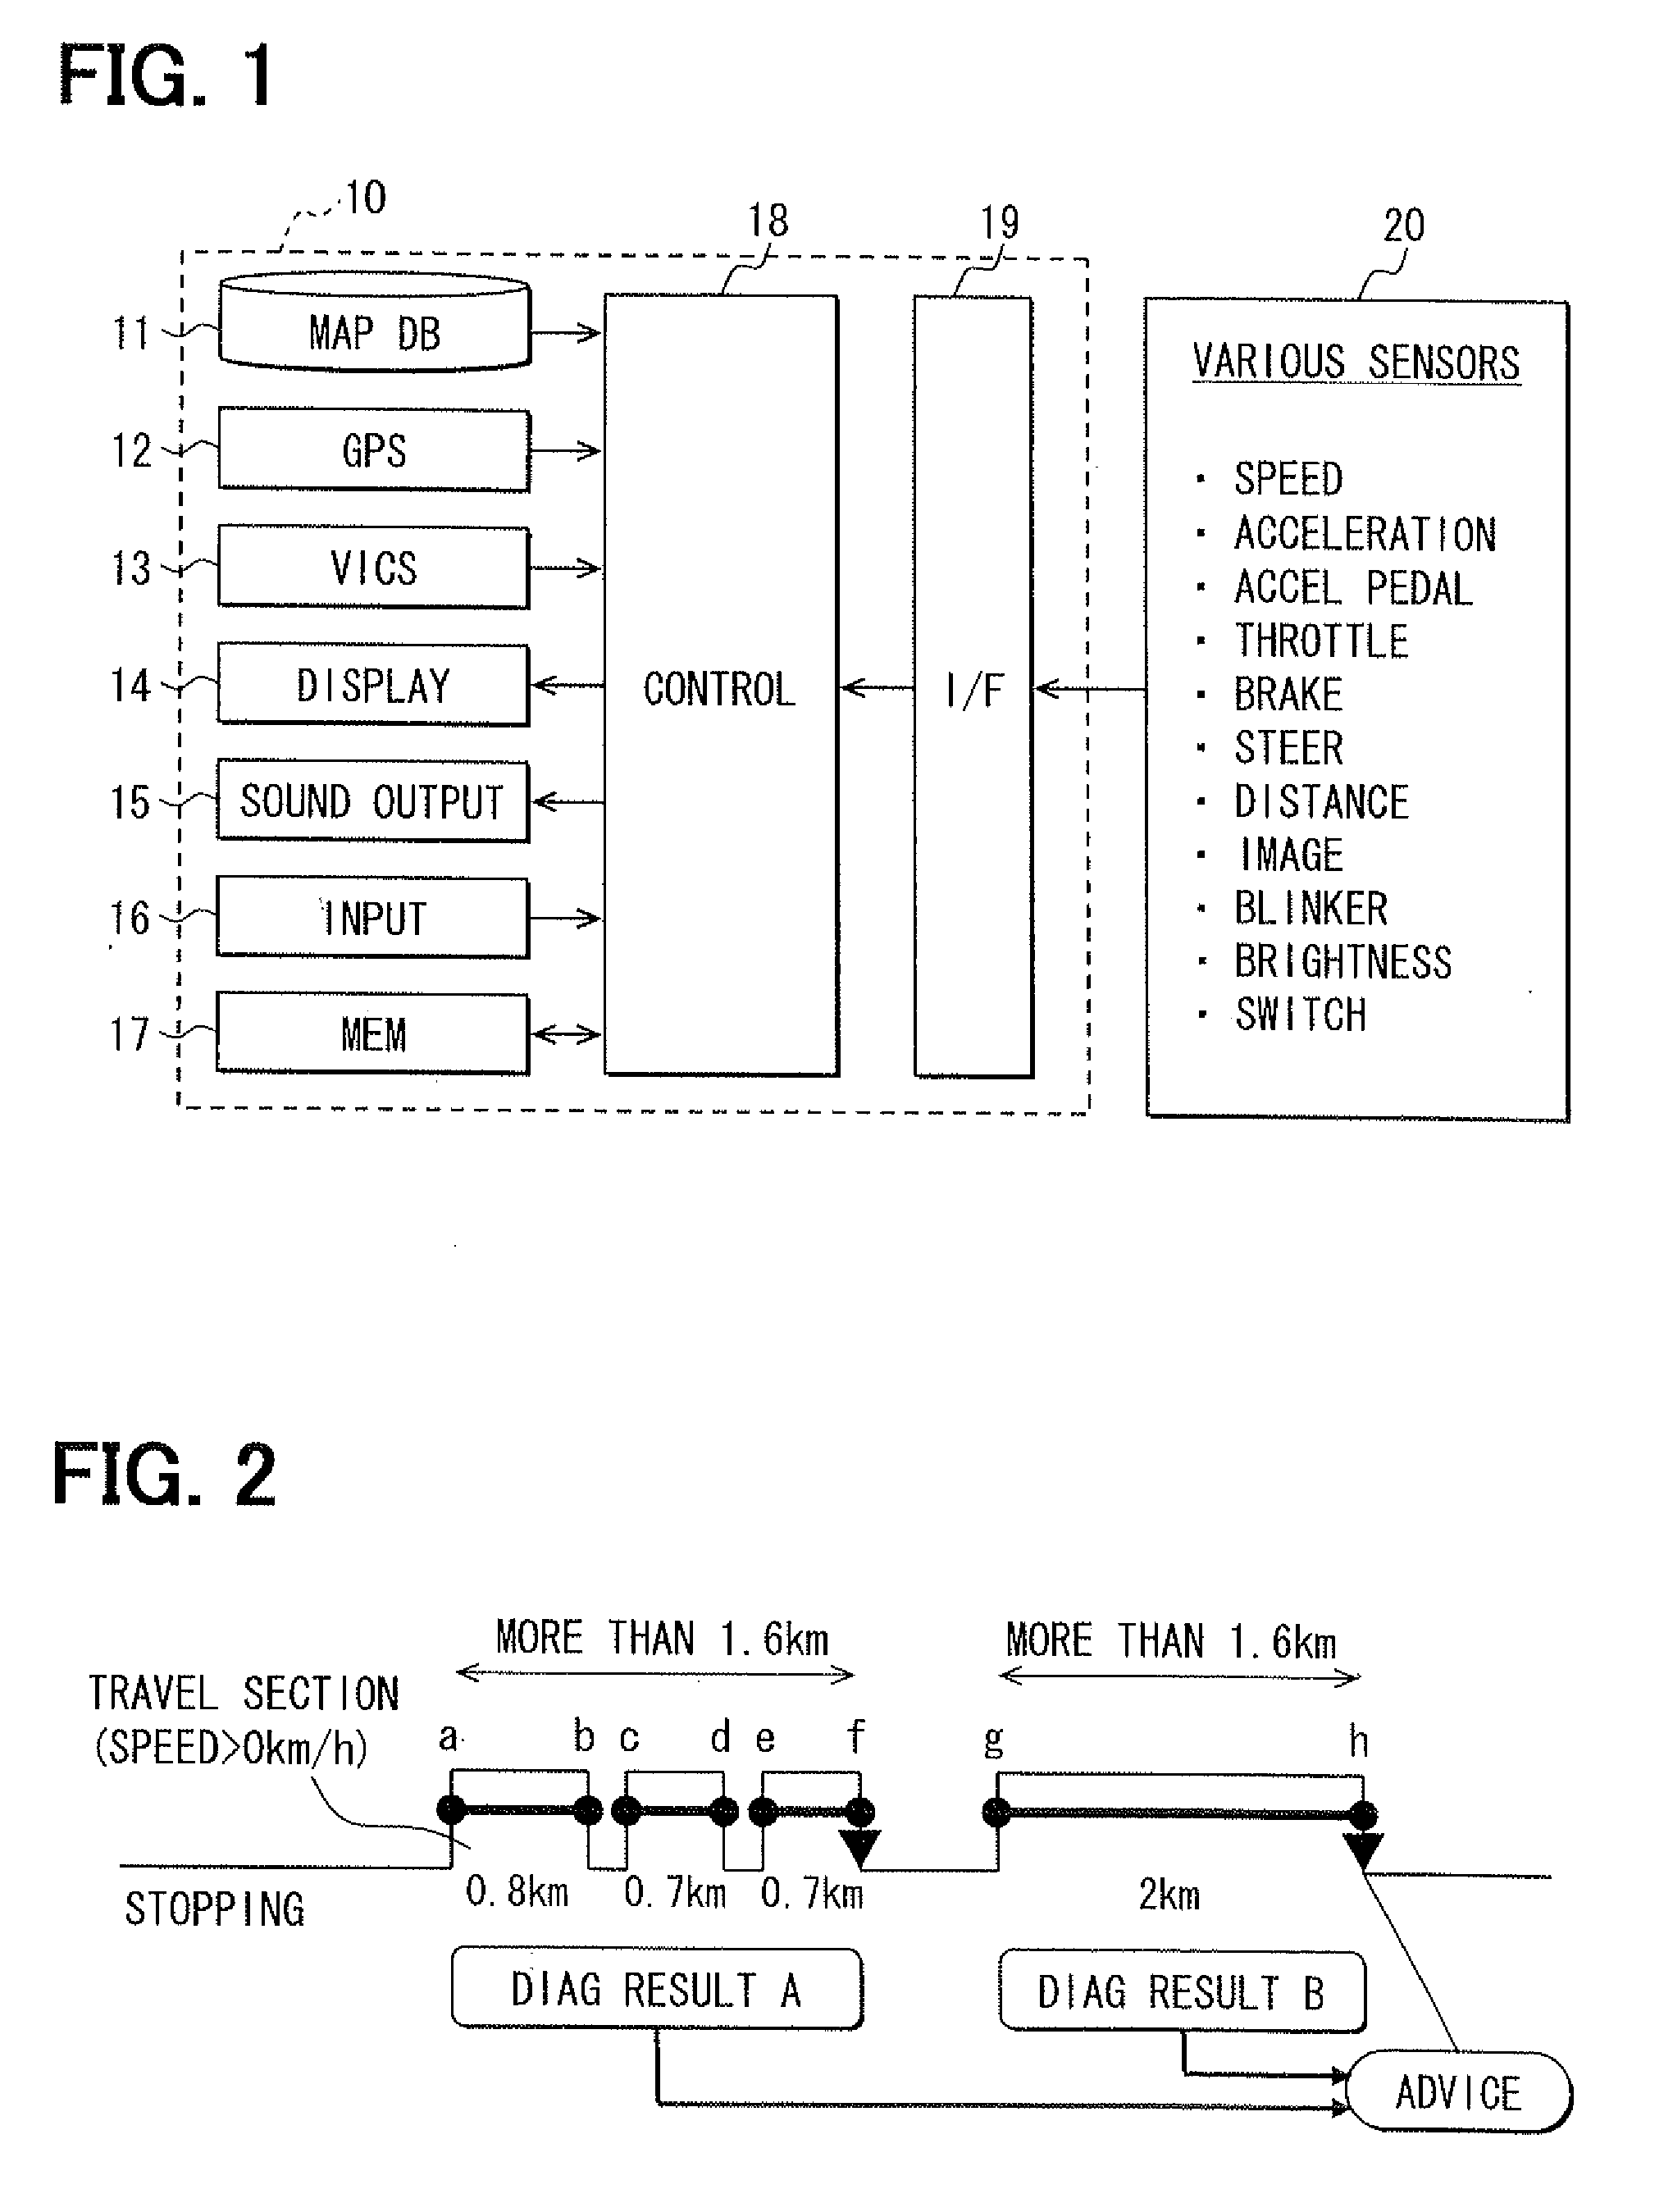 Apparatus and method for providing driving advice